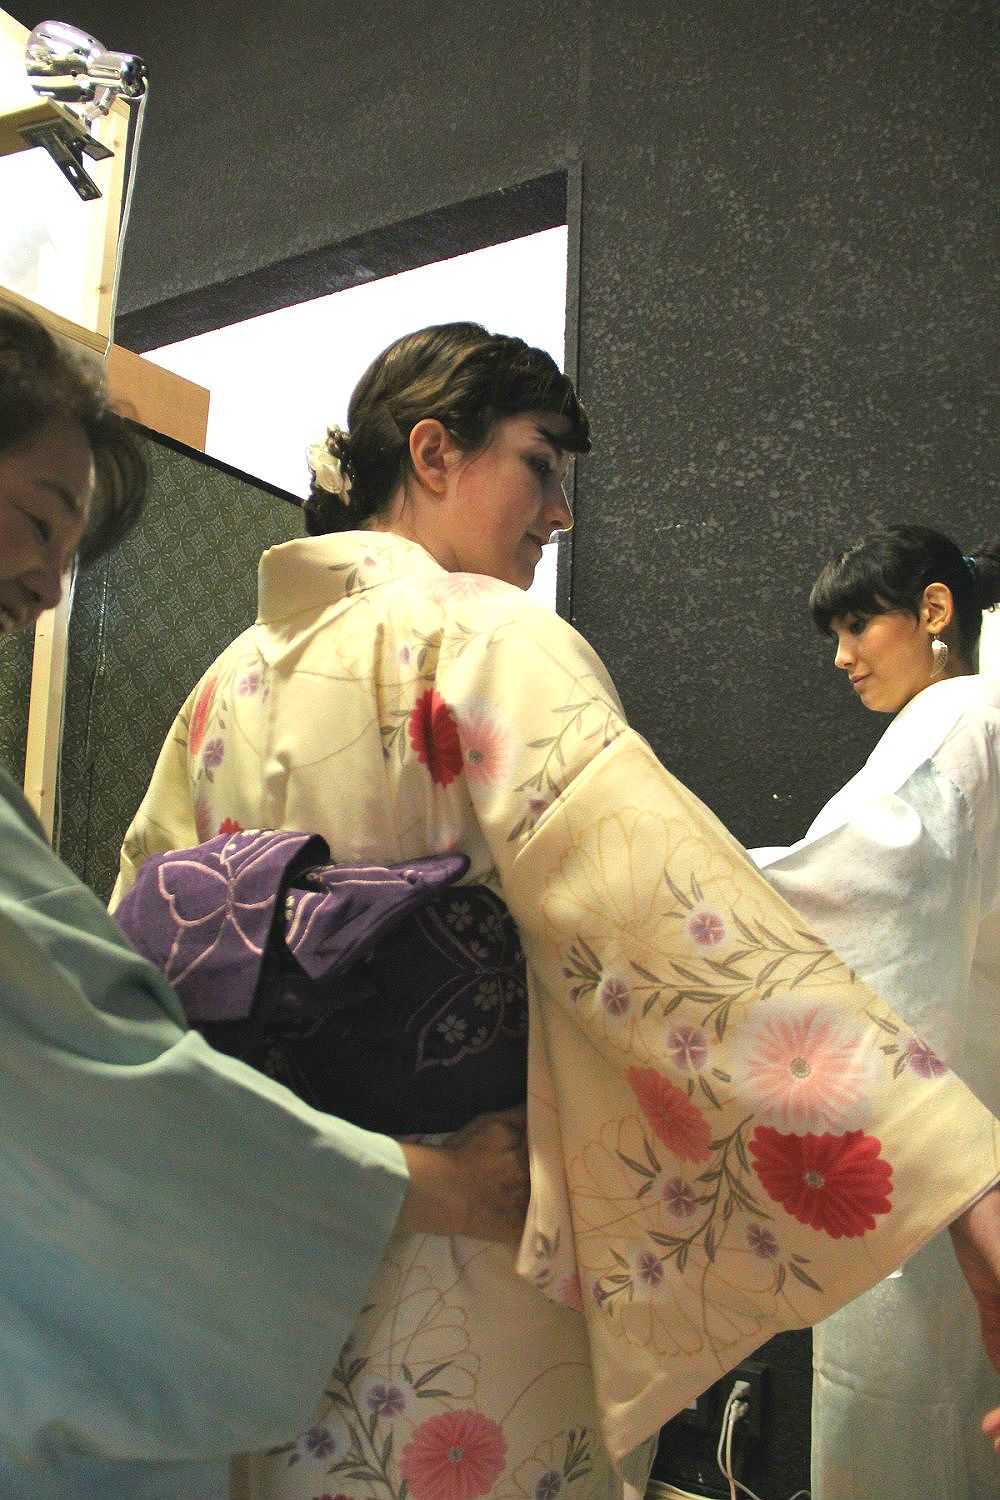 Kimono experience at Lake Ashi in Hakone, a place for viewing Mt